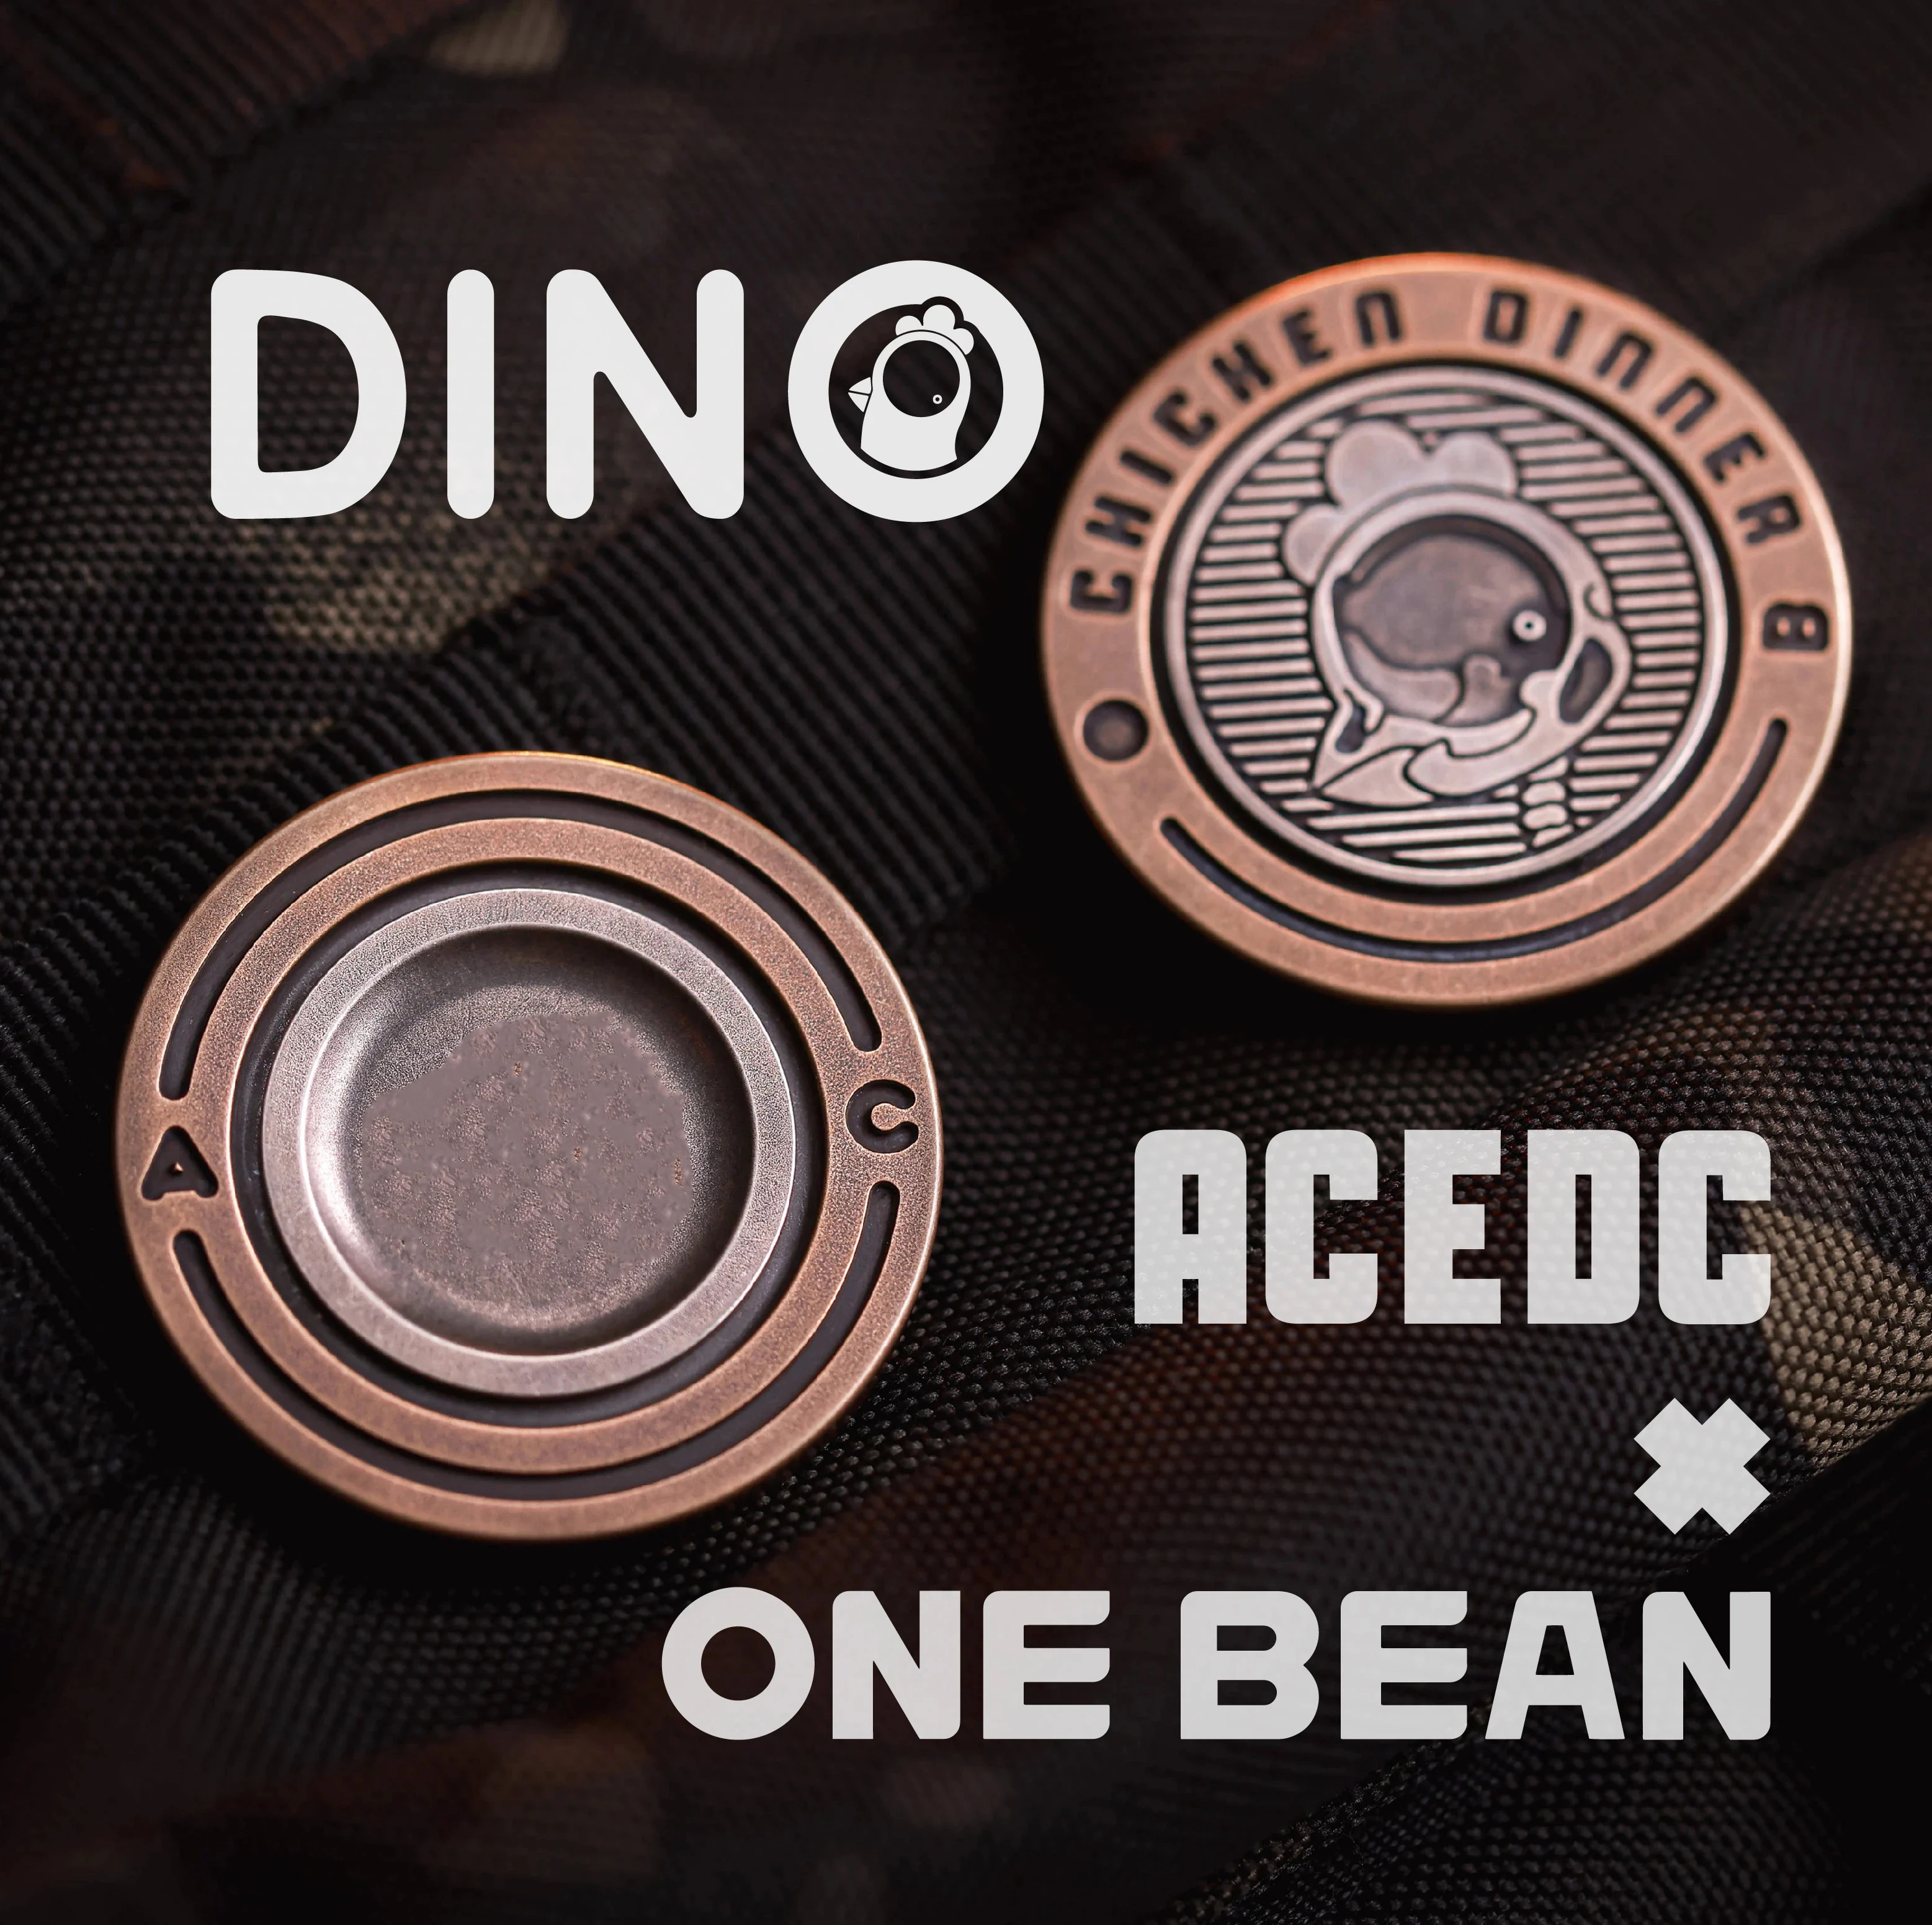 

ACEdc xOB Dino Haptic Coin Chicken Dinner B Winner Fidget Toy EDC Adults Desk Top Decompression Anti Stress Toy Limited Edition